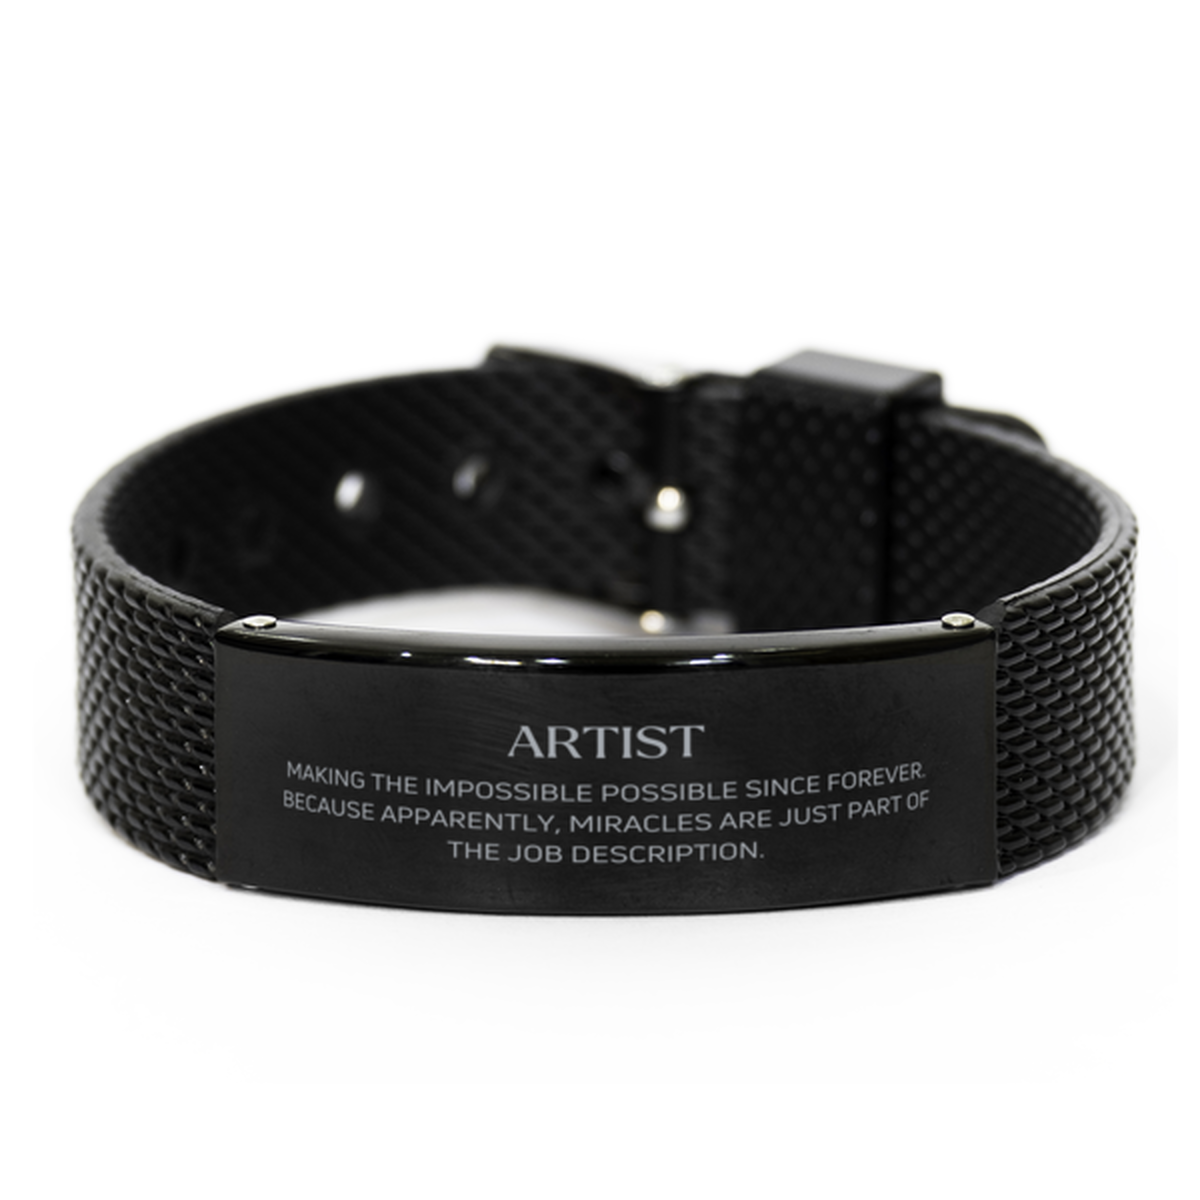 Funny Artist Gifts, Miracles are just part of the job description, Inspirational Birthday Black Shark Mesh Bracelet For Artist, Men, Women, Coworkers, Friends, Boss